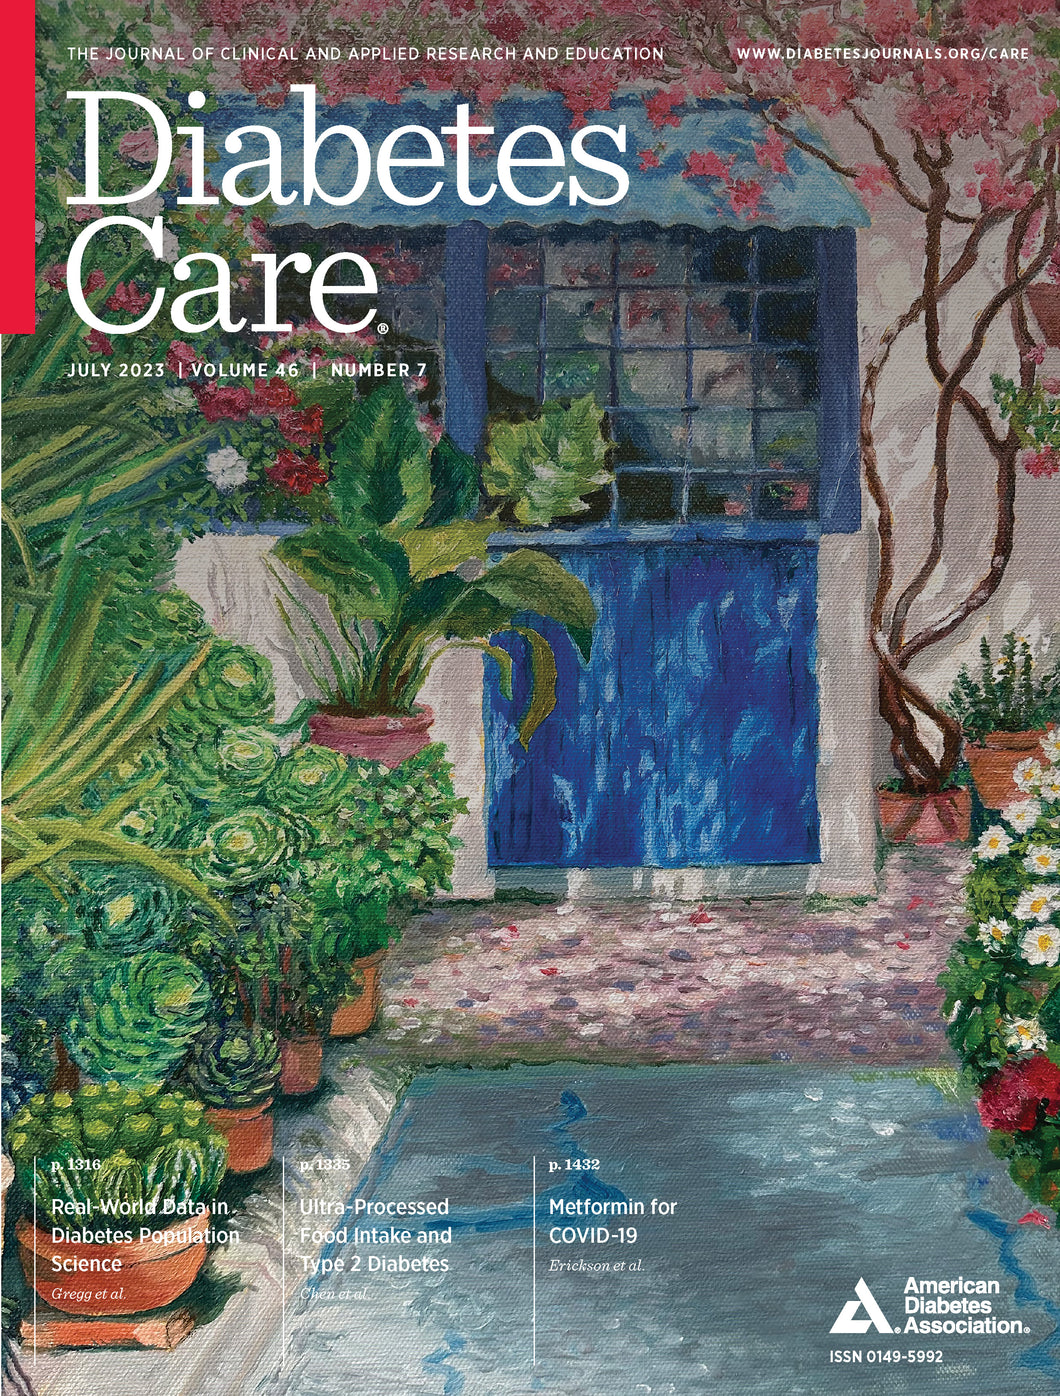 Diabetes Care, Volume 46, Issue 7, July 2023